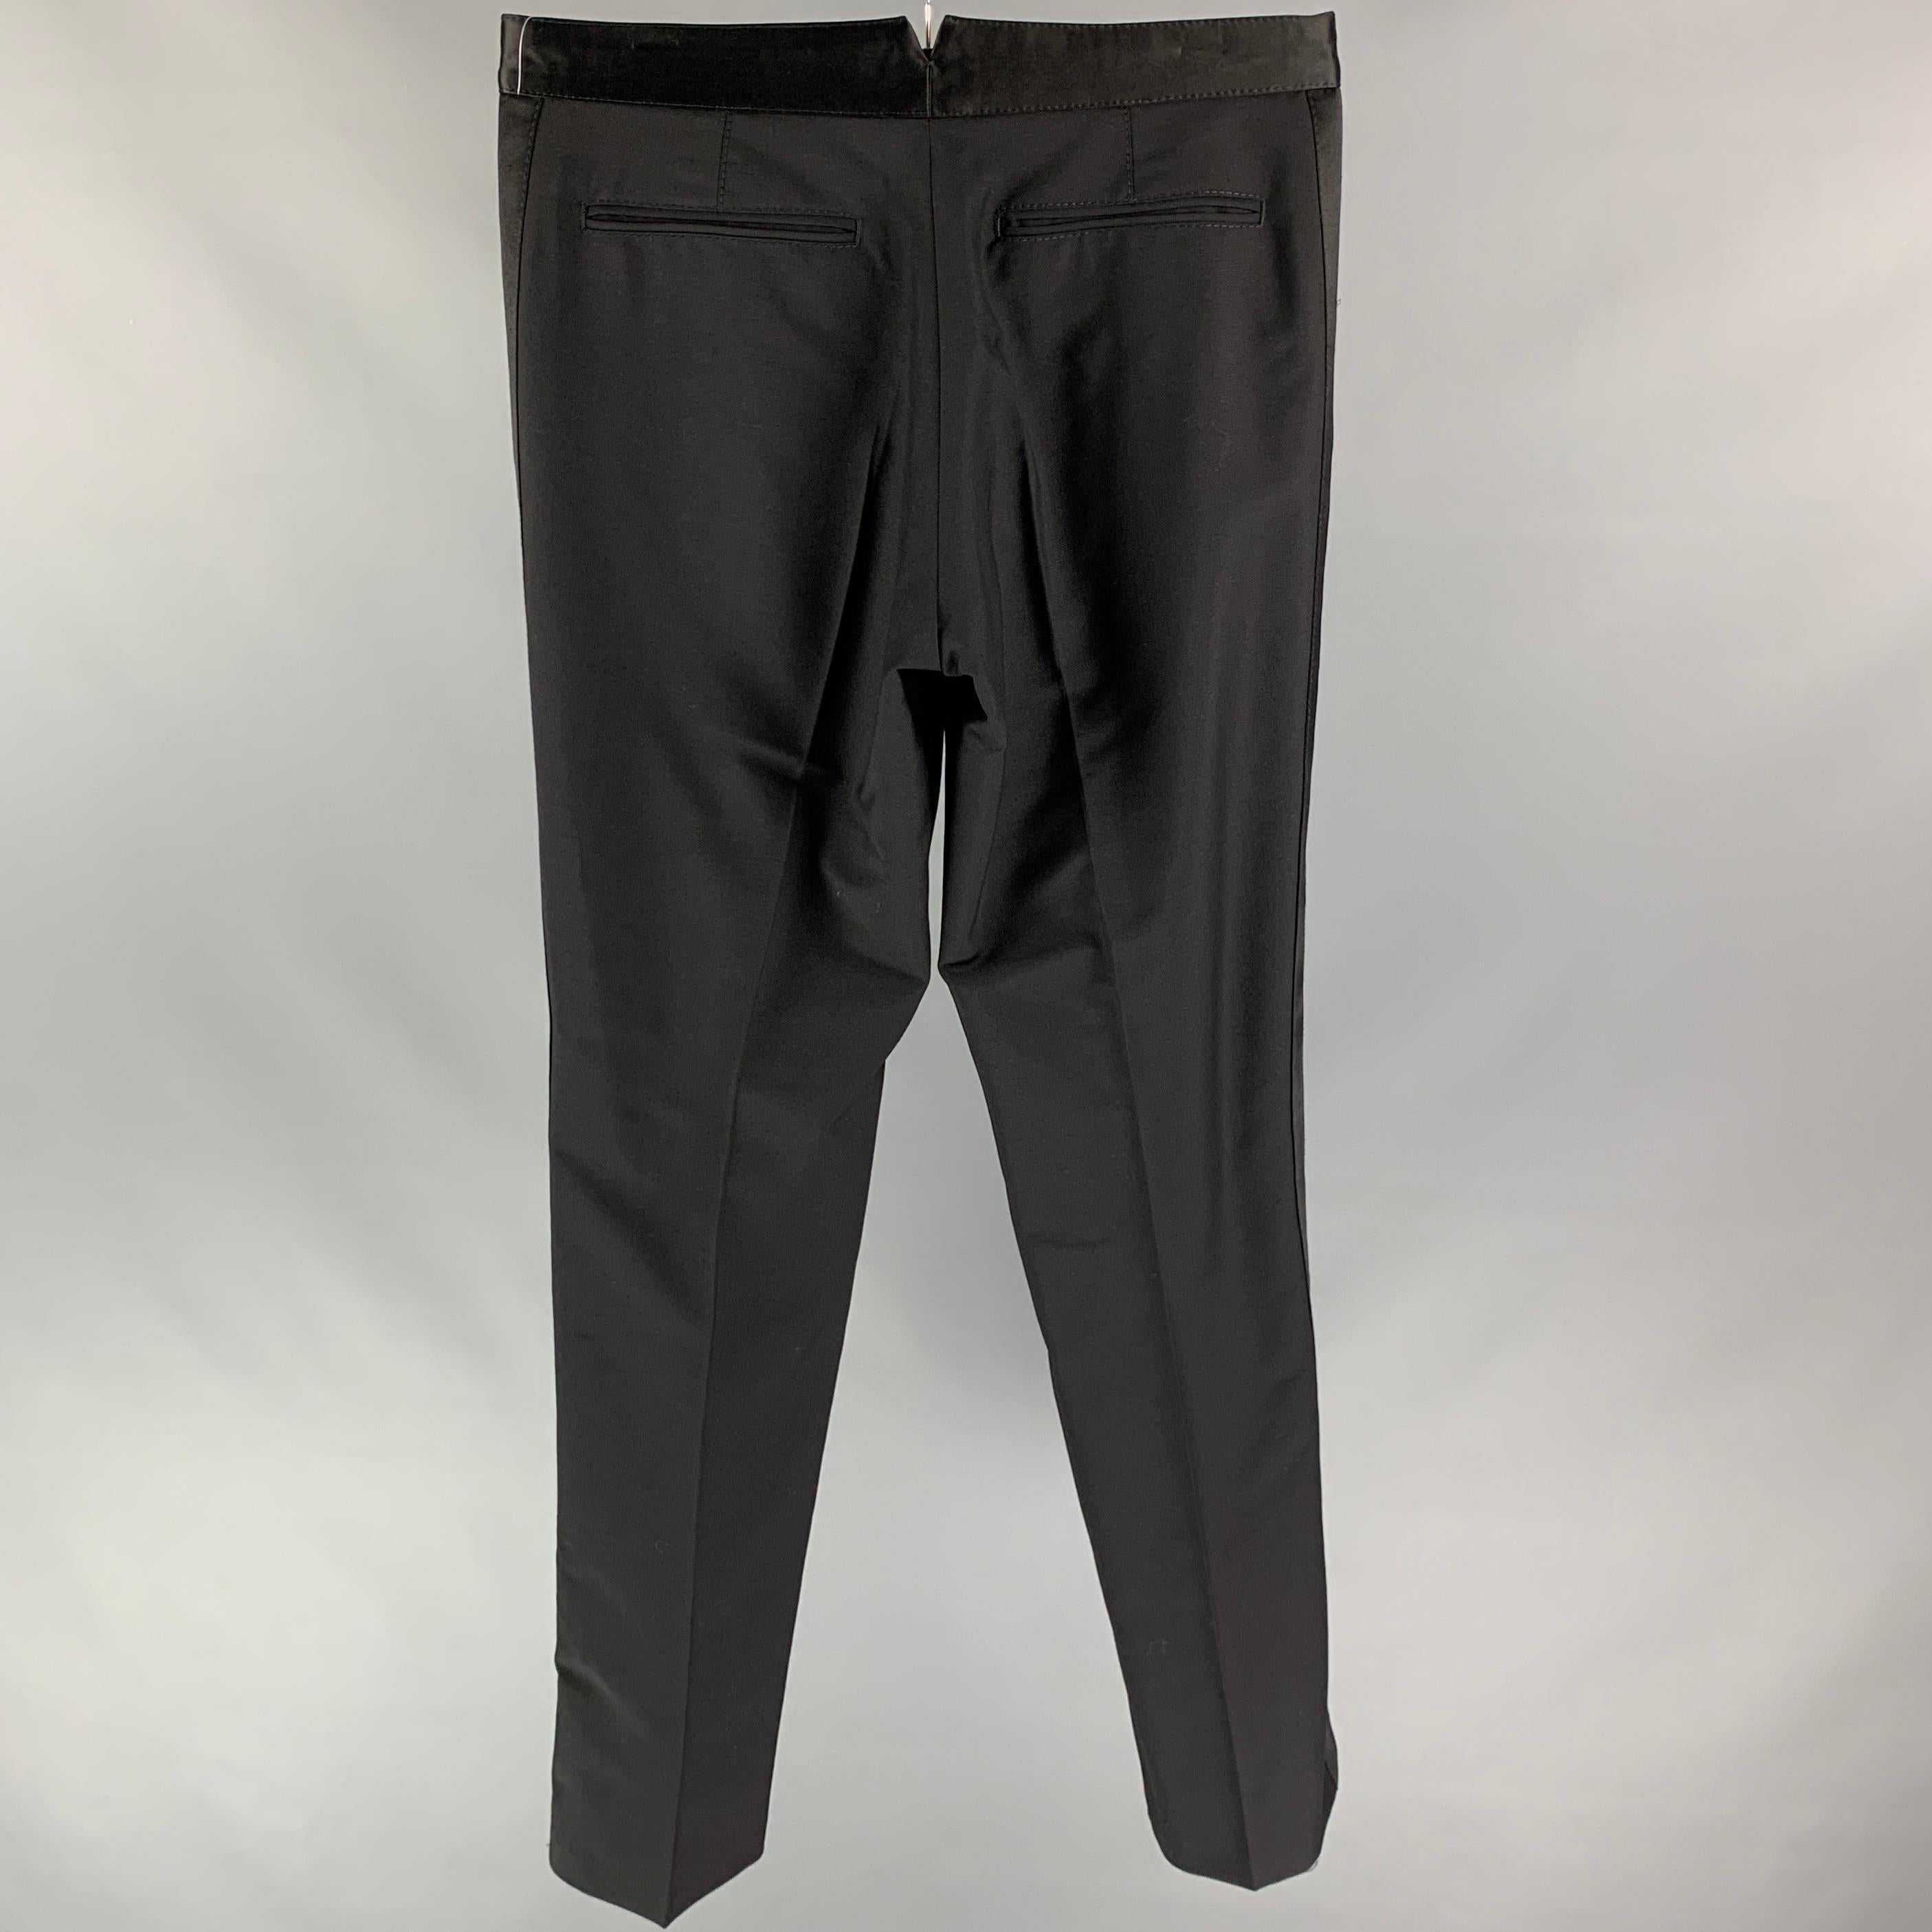 VIKTOR & ROLF tuxedo dress pants comes in a black wool / mohair featuring a flat front, straight leg, front tab, and a zip fly closure. Made in Italy.

Very Good Pre-Owned Condition.
Marked: 50

Measurements:

Waist: 32 in.
Rise: 9.5 in.
Inseam: 35